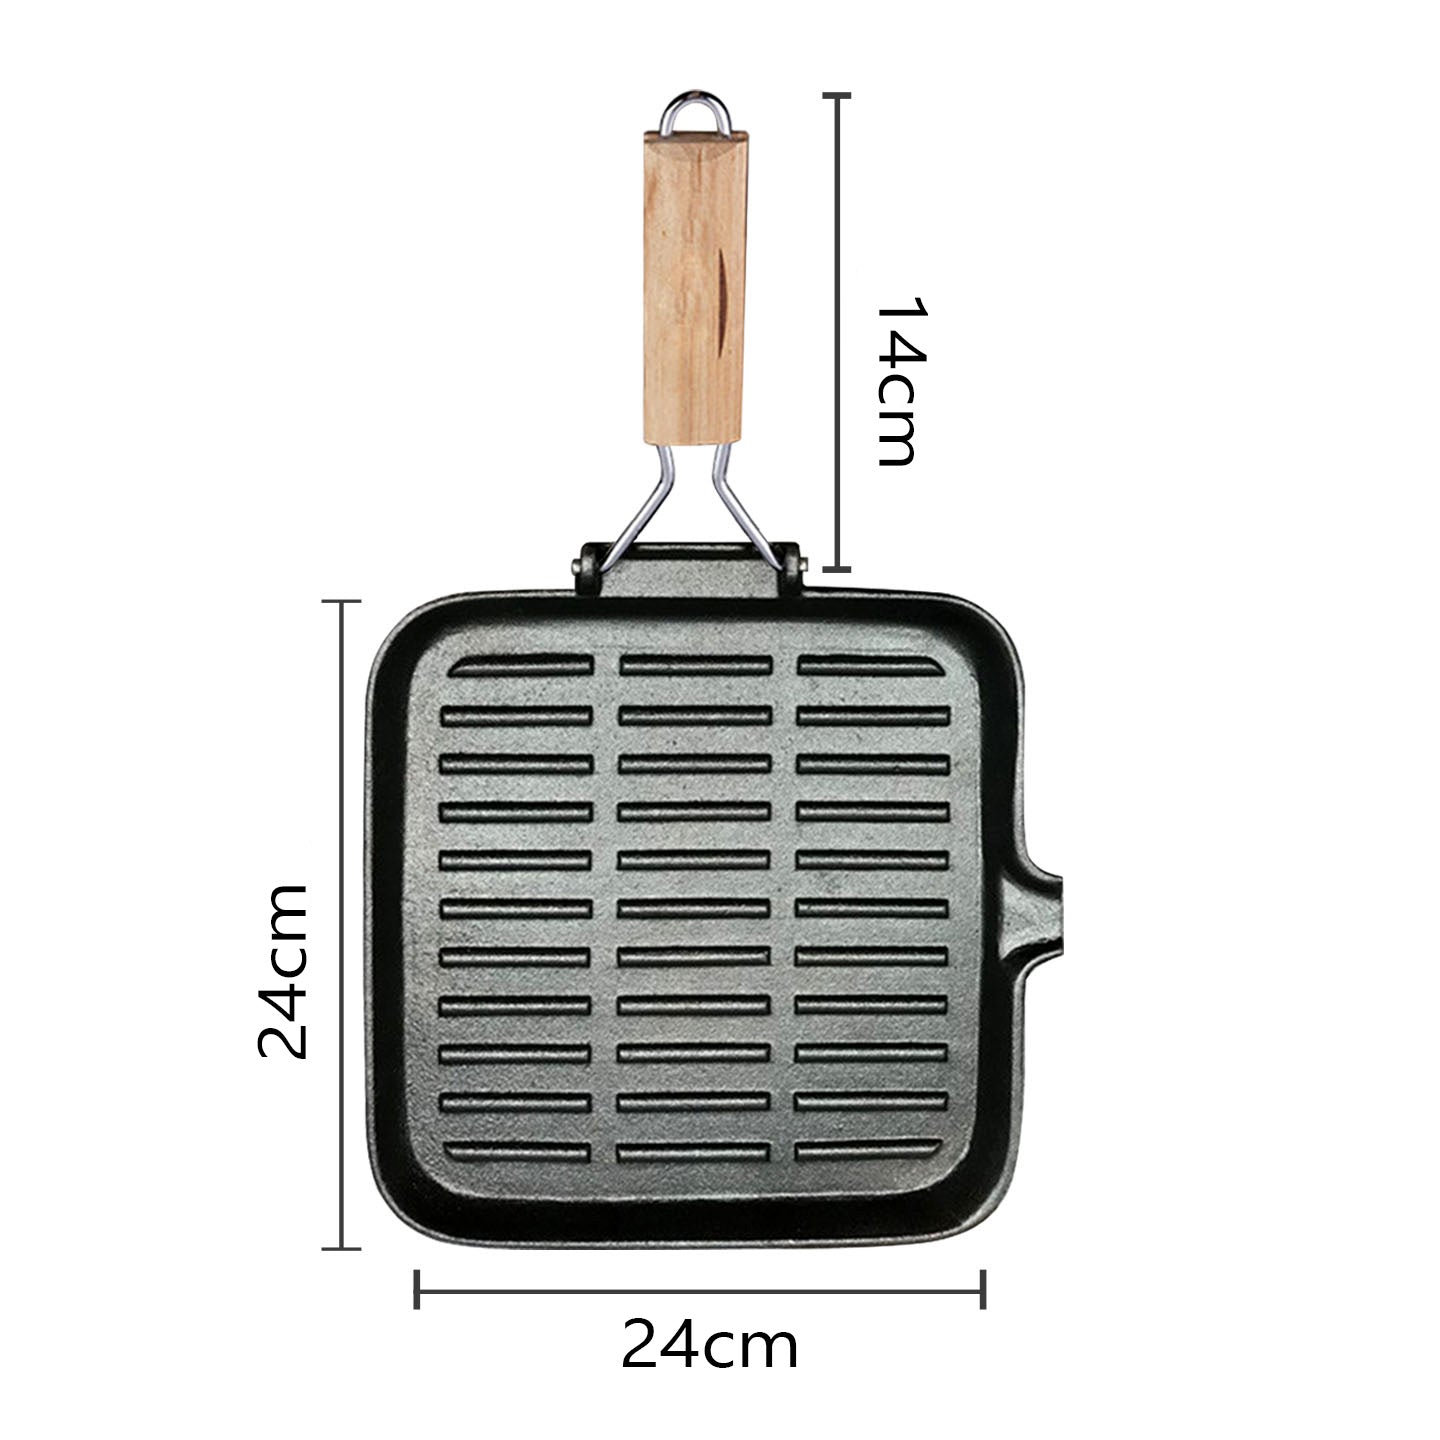 28cm Ribbed Cast Iron Square Steak Frying Grill Skillet Pan with Folding Wooden Handle - AllTech